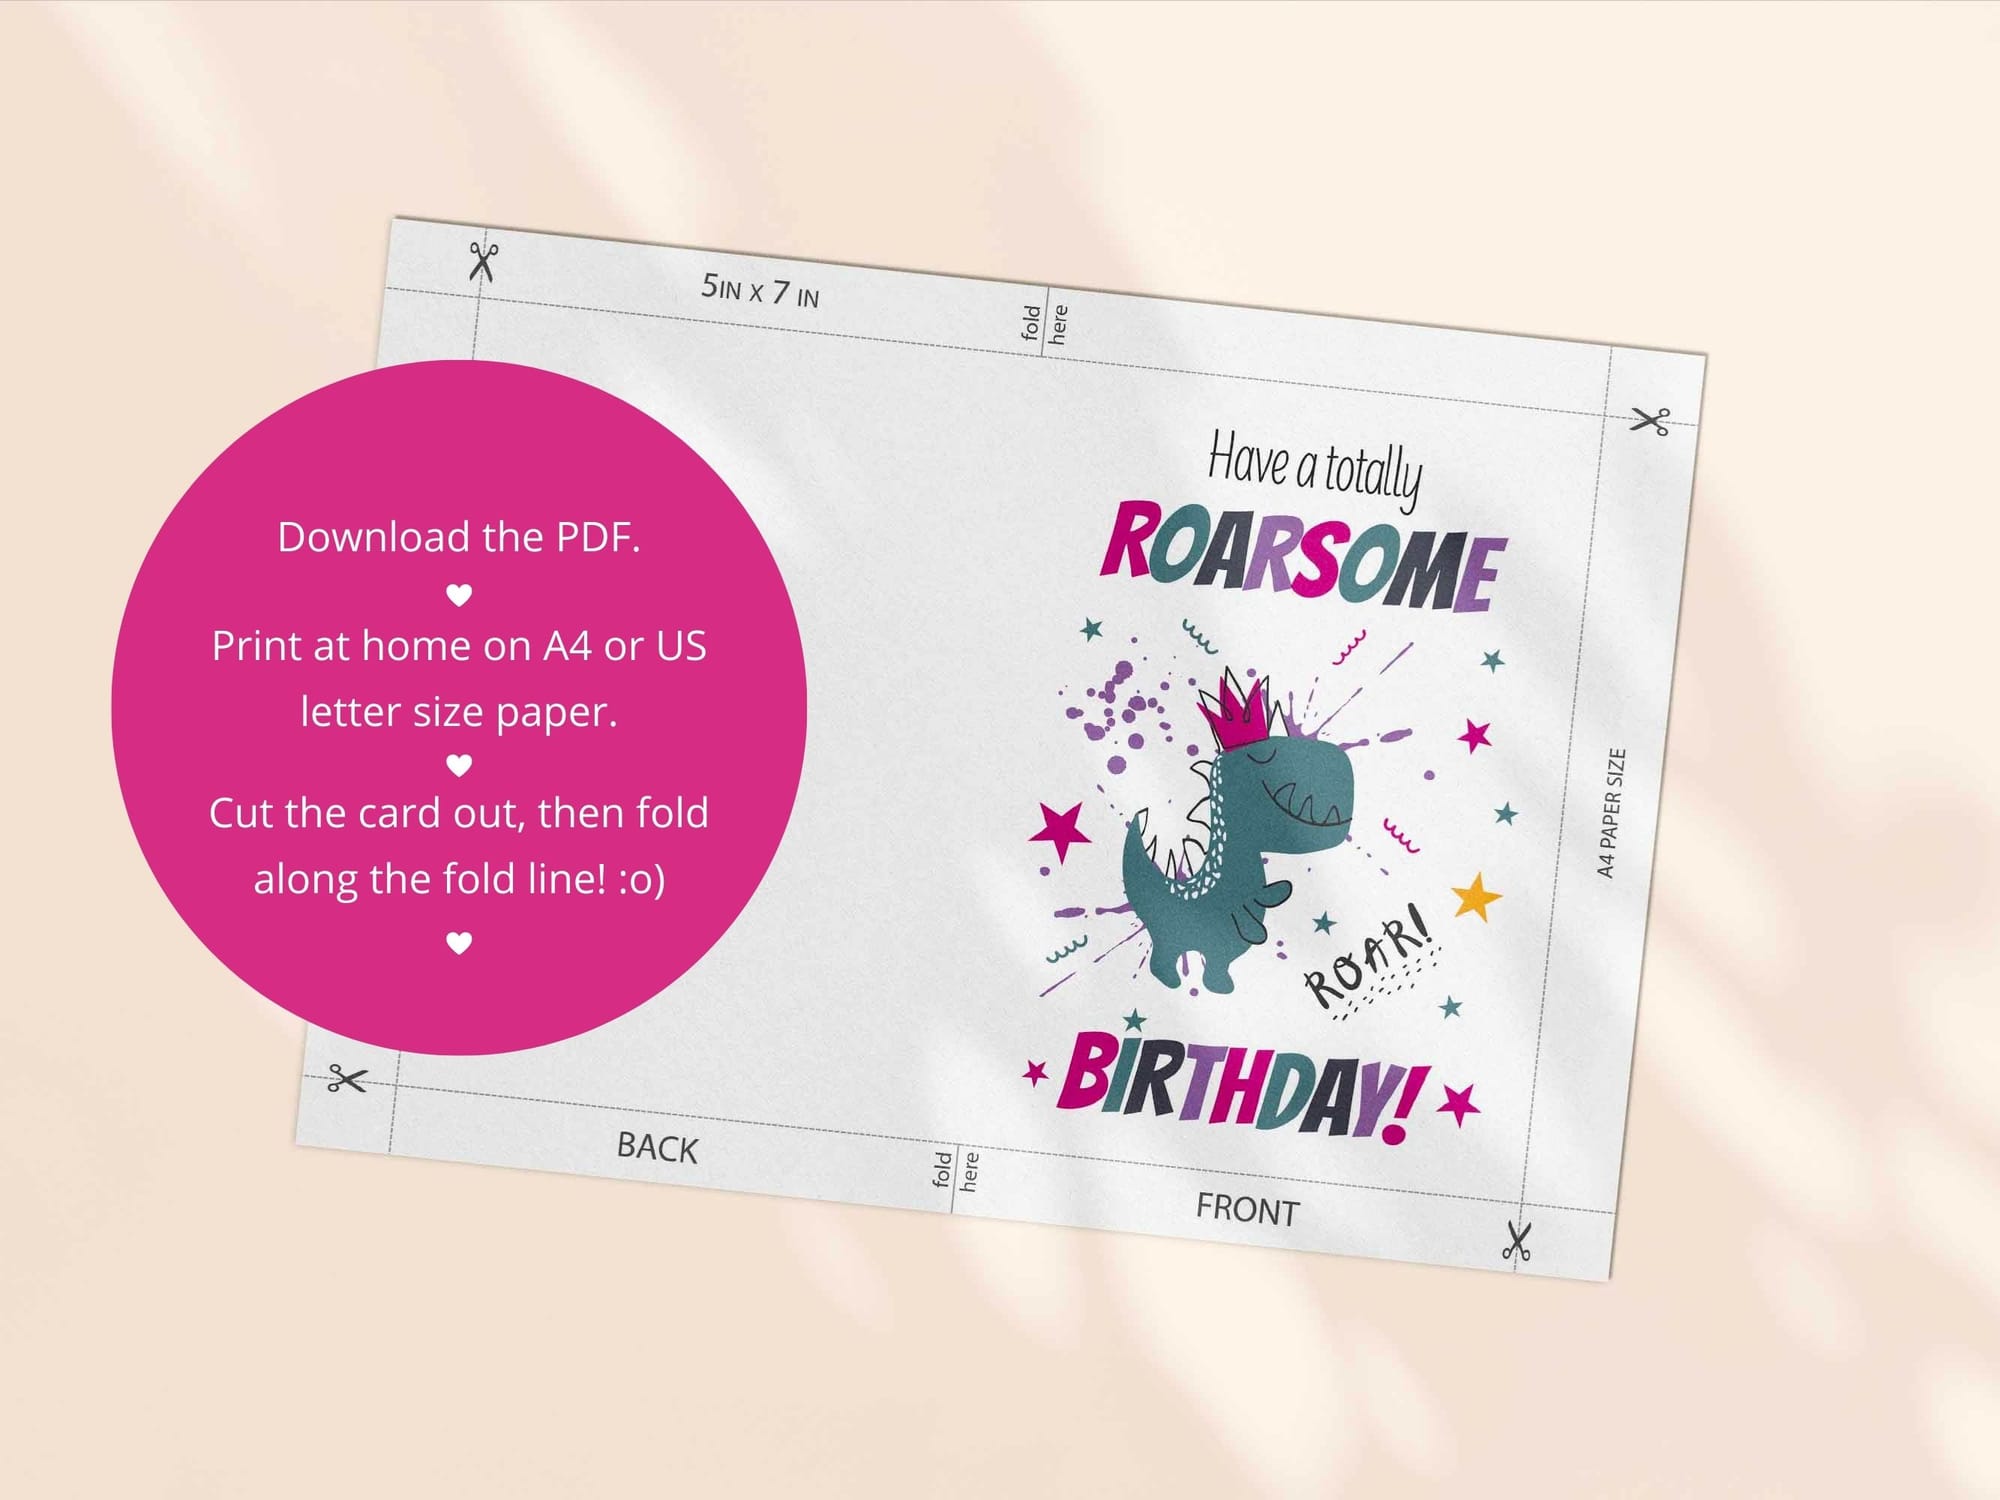 Printable birthday card template - both an A4 and US Letter print template are included in this download.